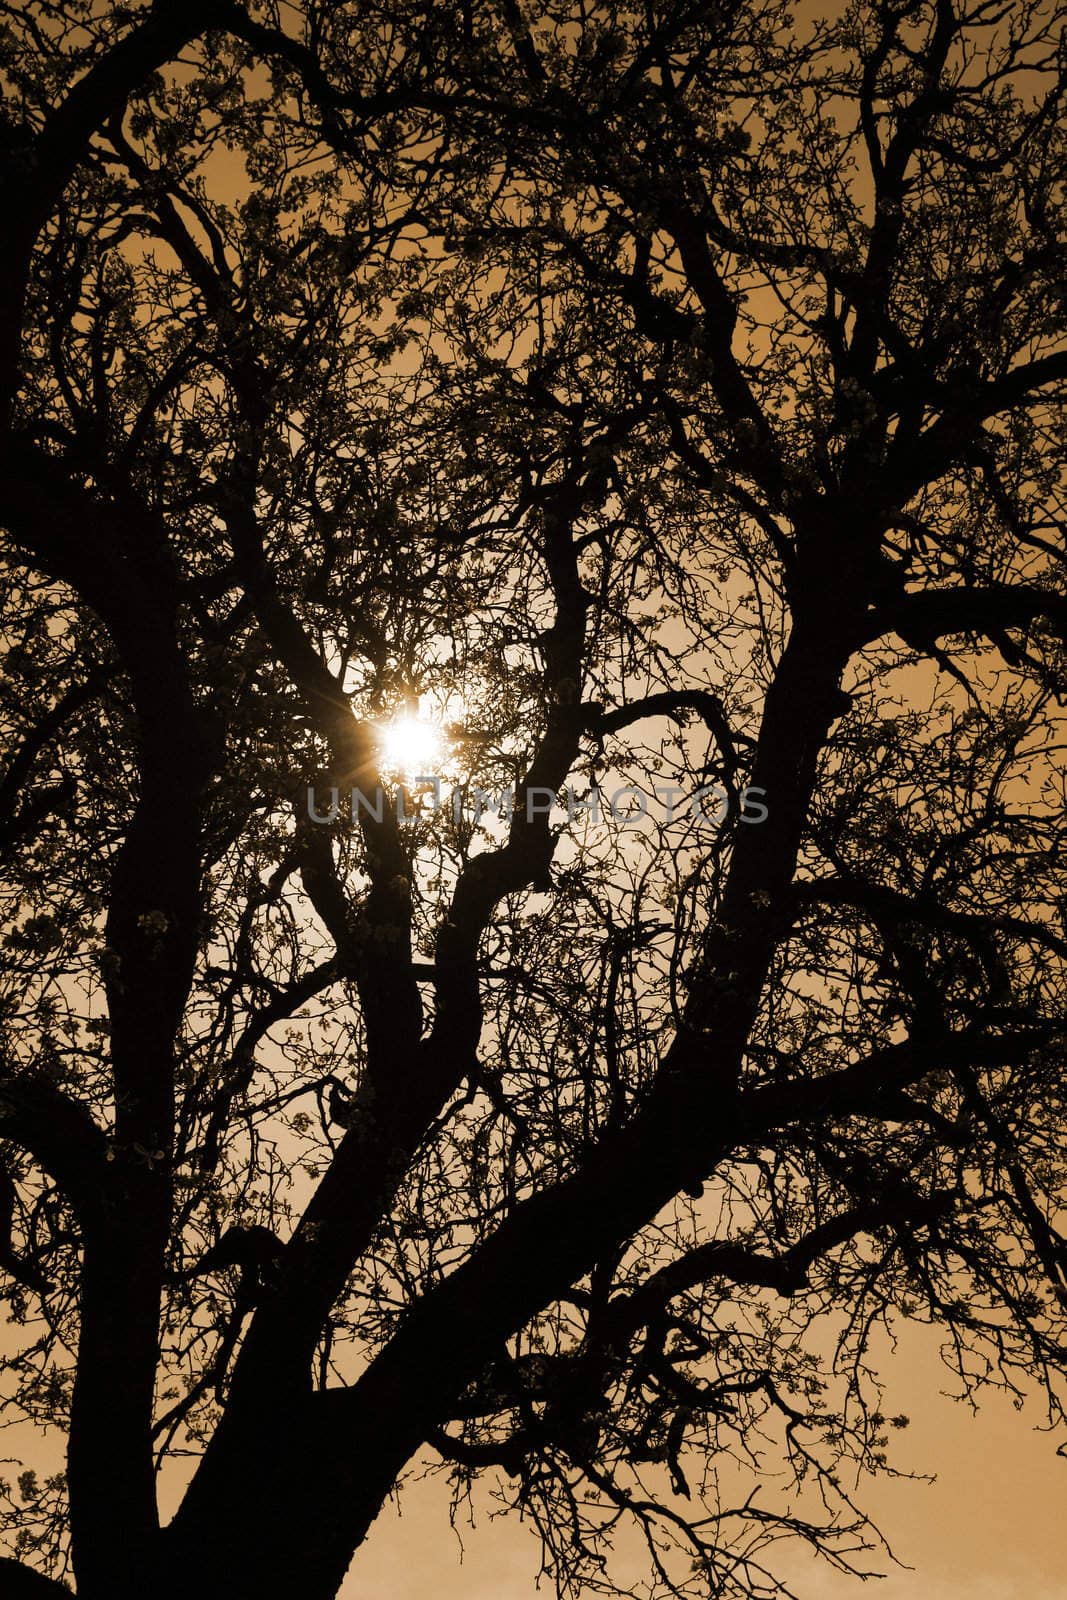 tree silhouette at sunset by Brightdawn